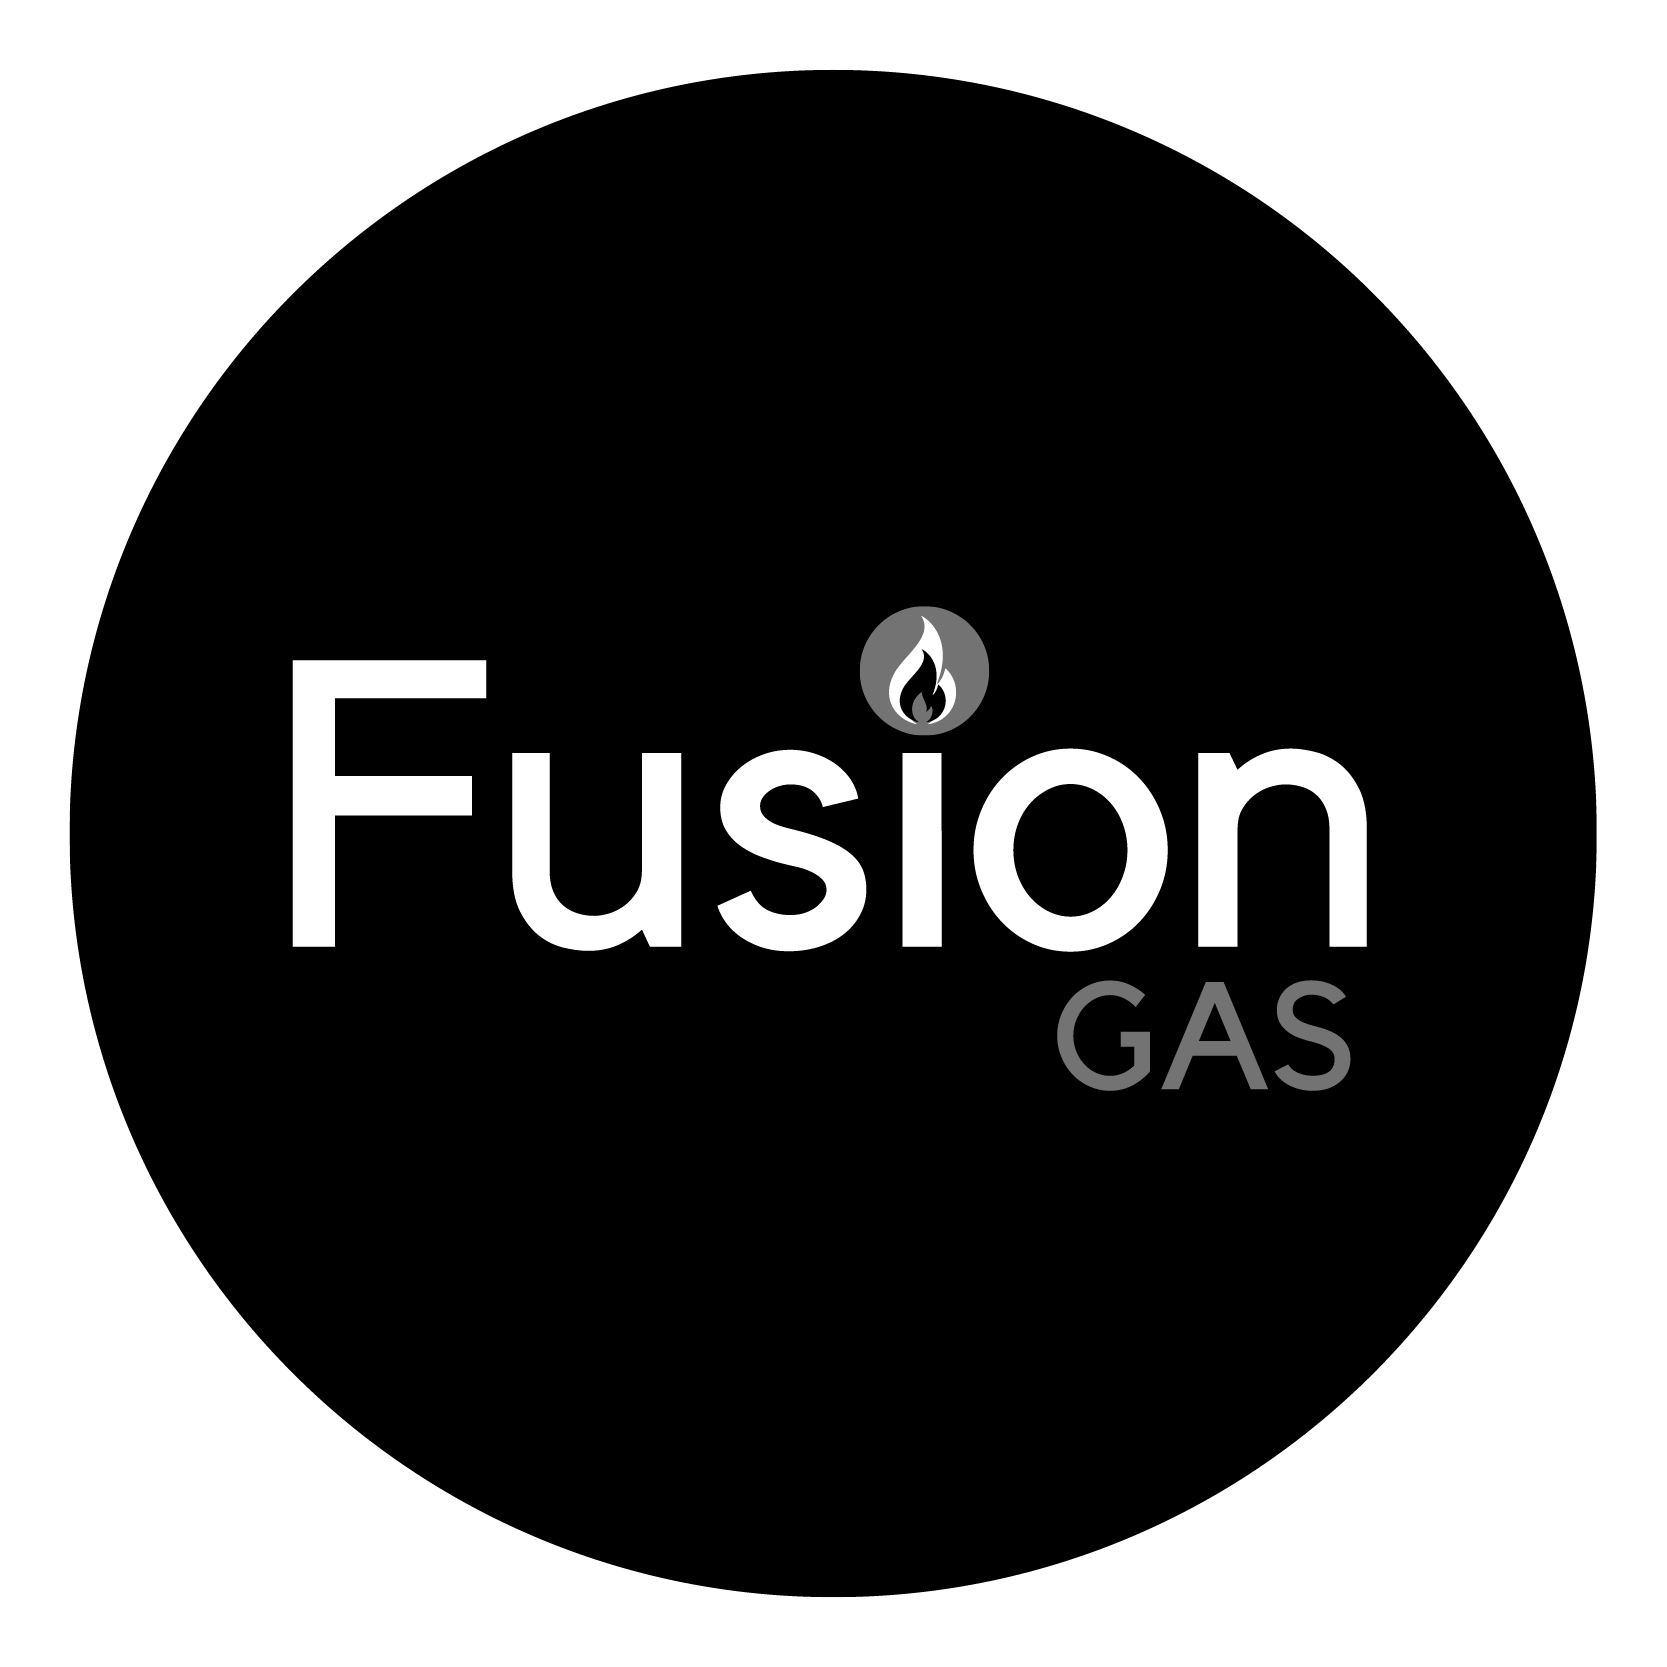 We're sponsored by Fusion Gas